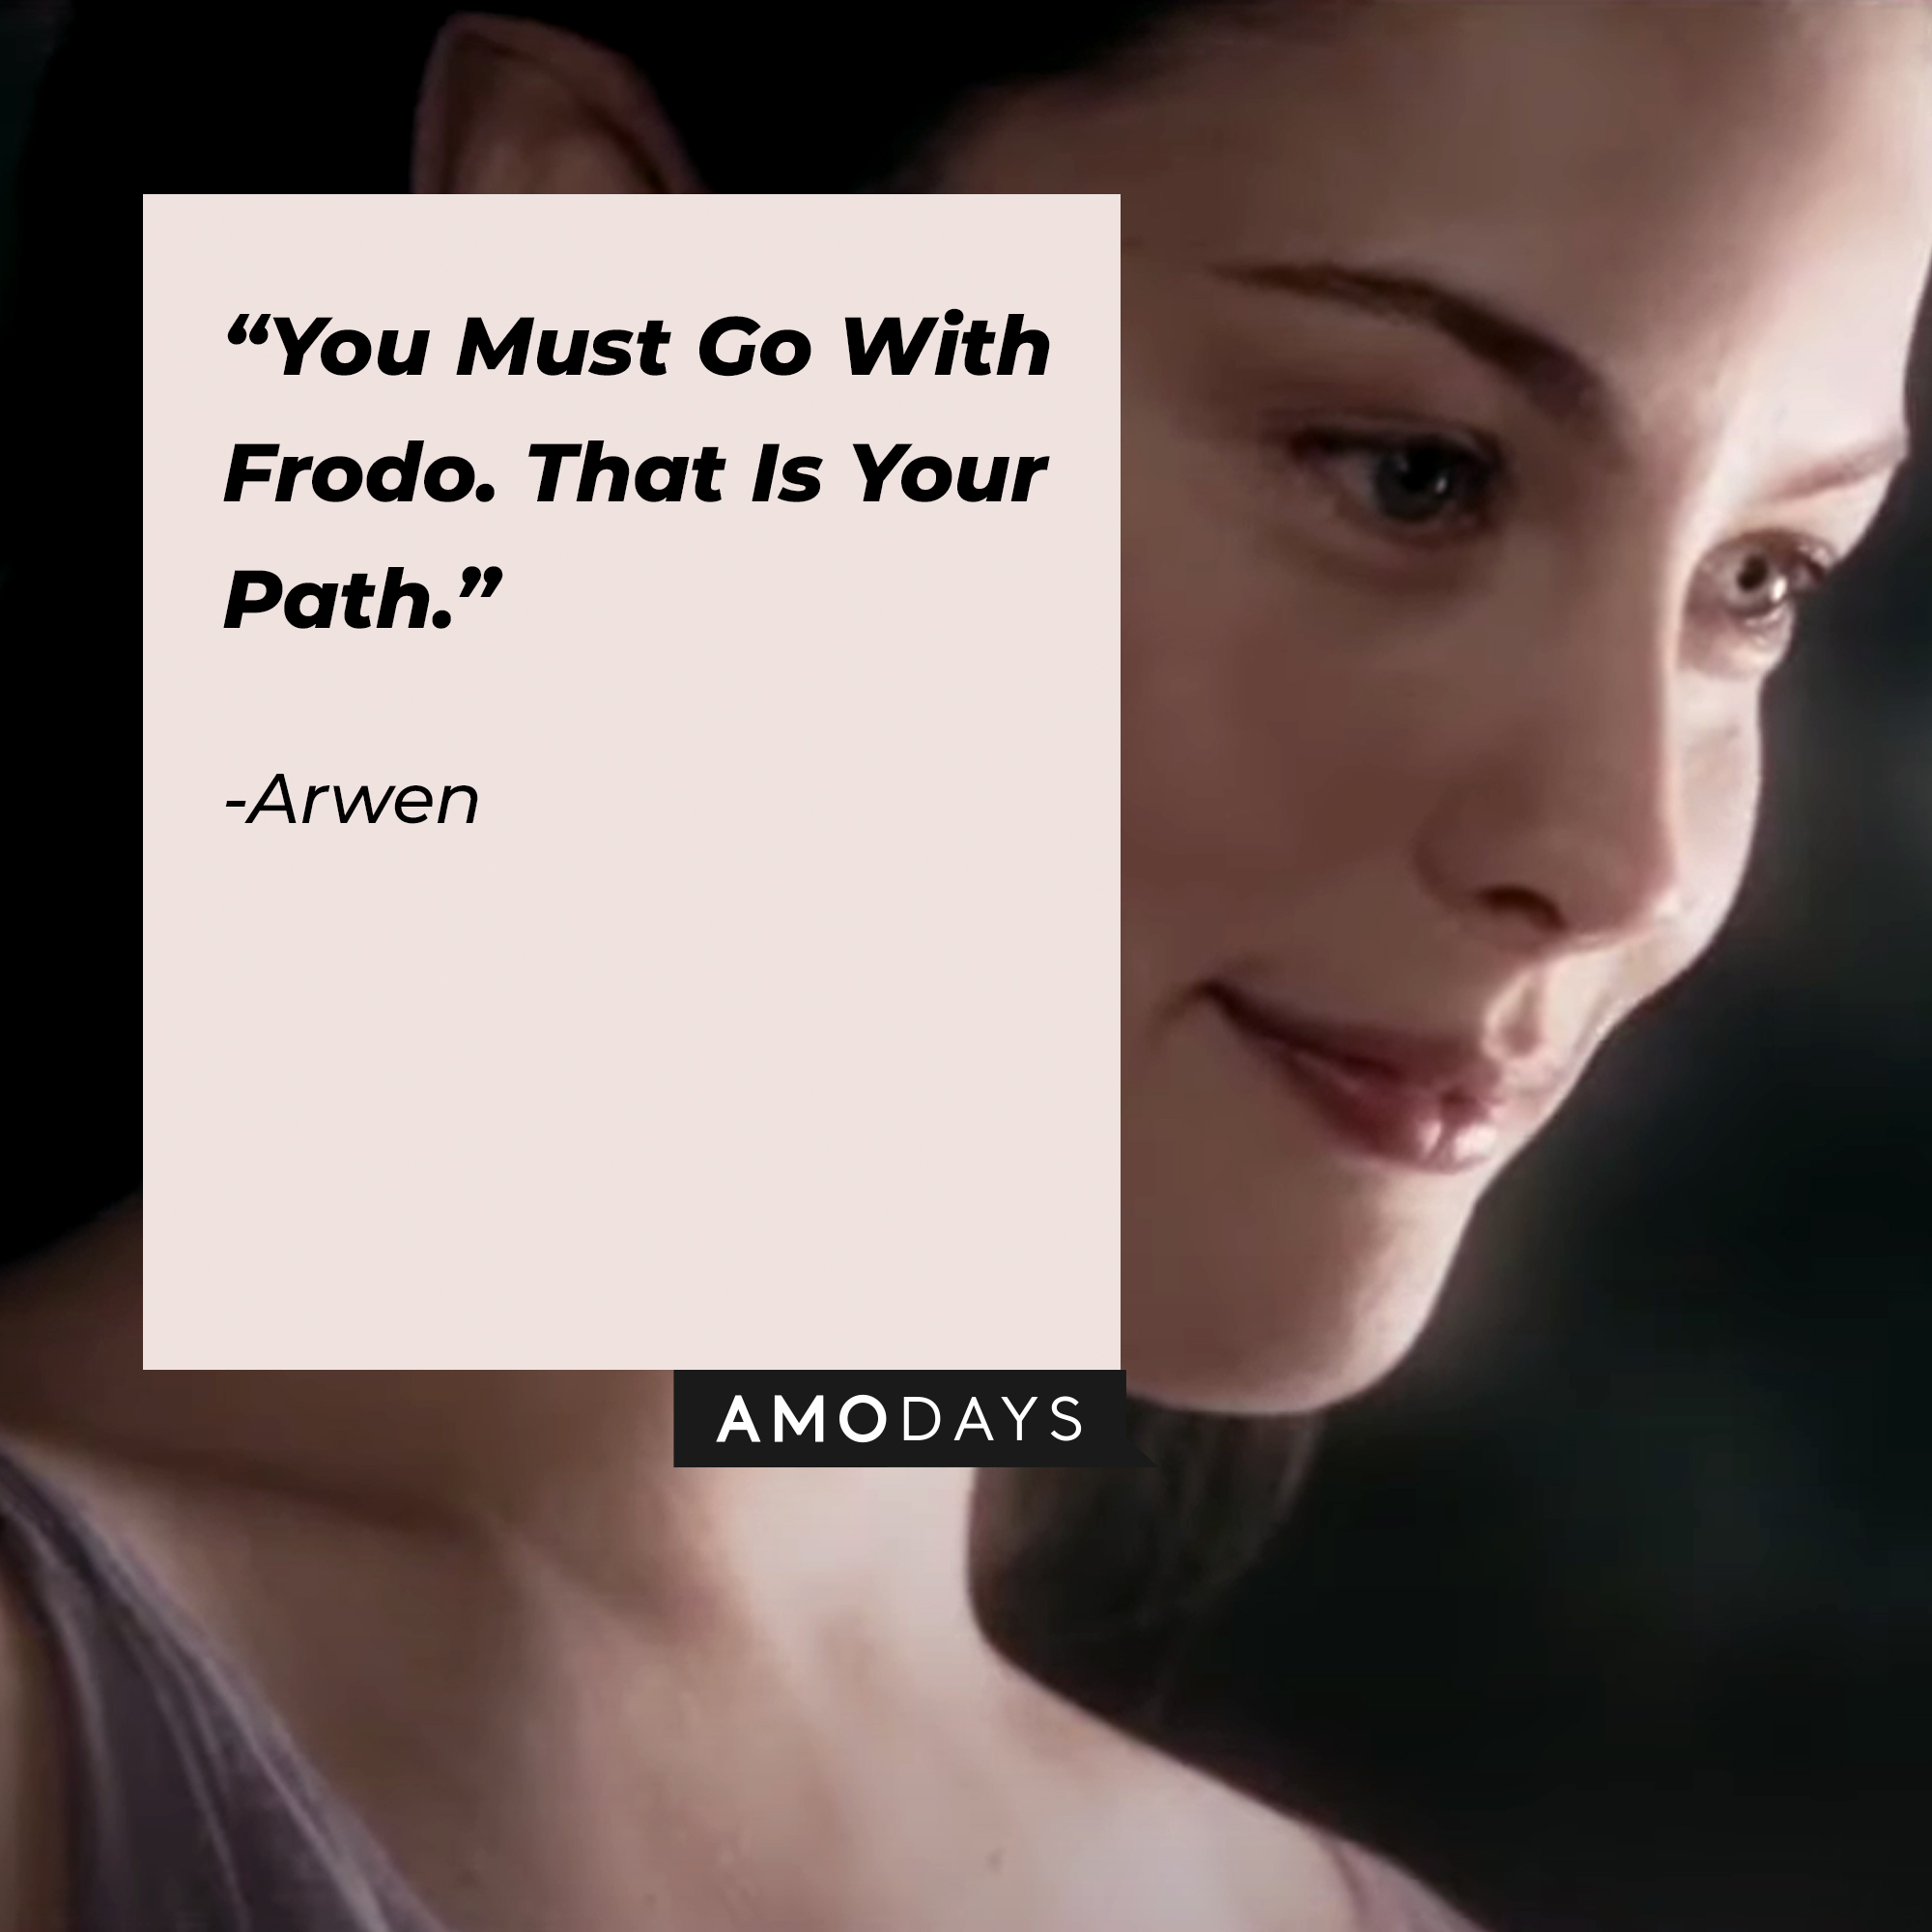 Arwen's quote : "You Must Go With Frodo. That Is Your Path." | Source: facebook.com/lordoftheringstrilogy